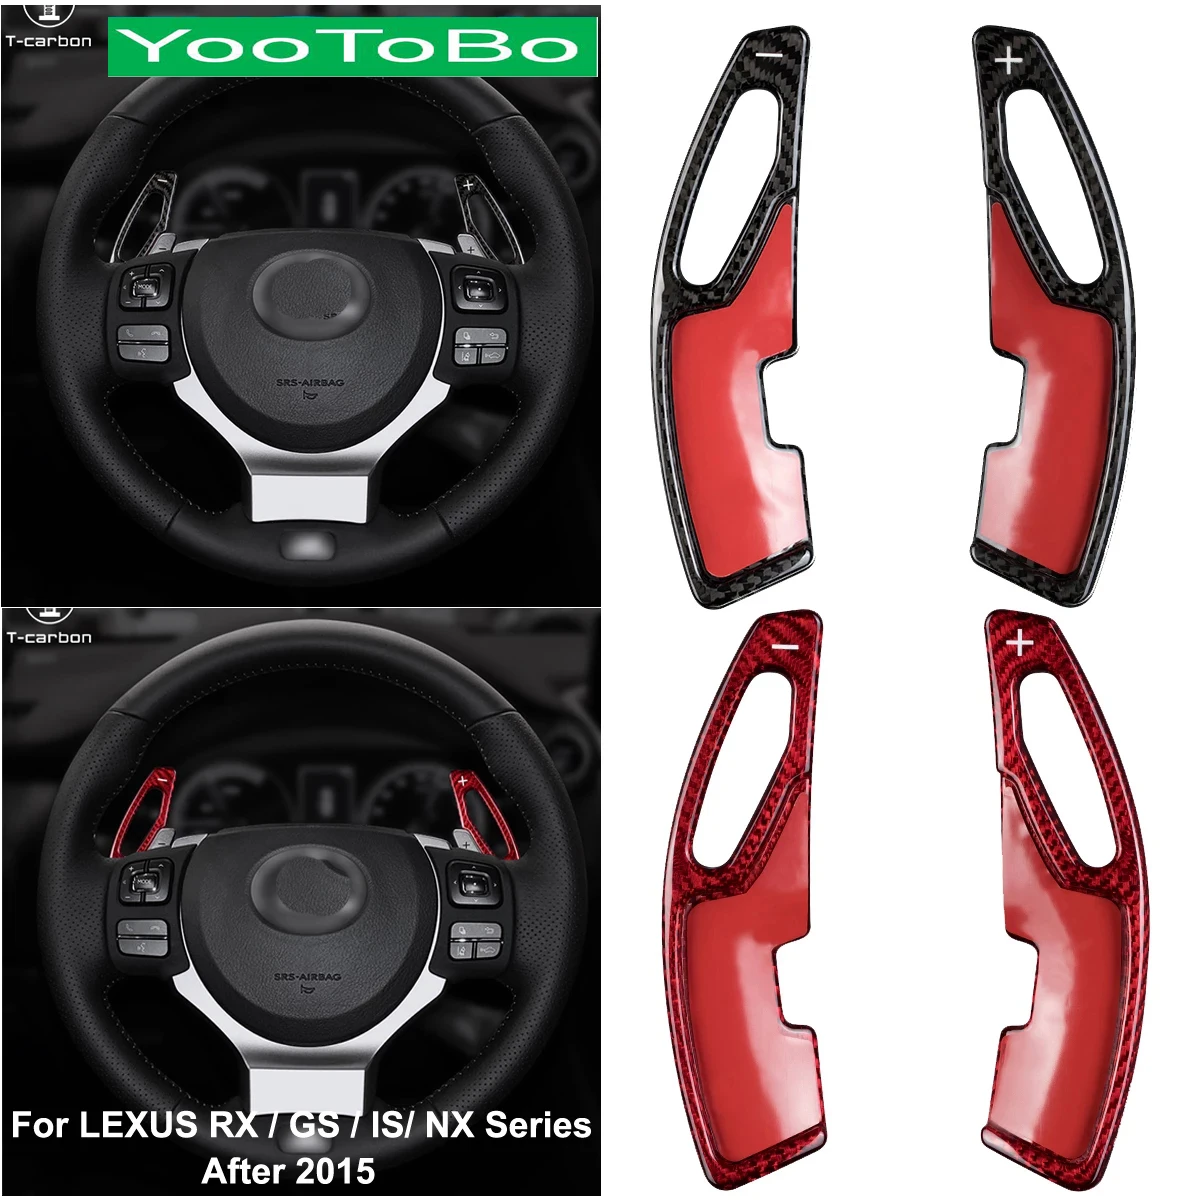 

Car Styling Real Carbon Fiber Steering Wheel Shifter Paddle Extenesion For Toyota LEXUS RX GS IS NX After 2015 Interior Moulding